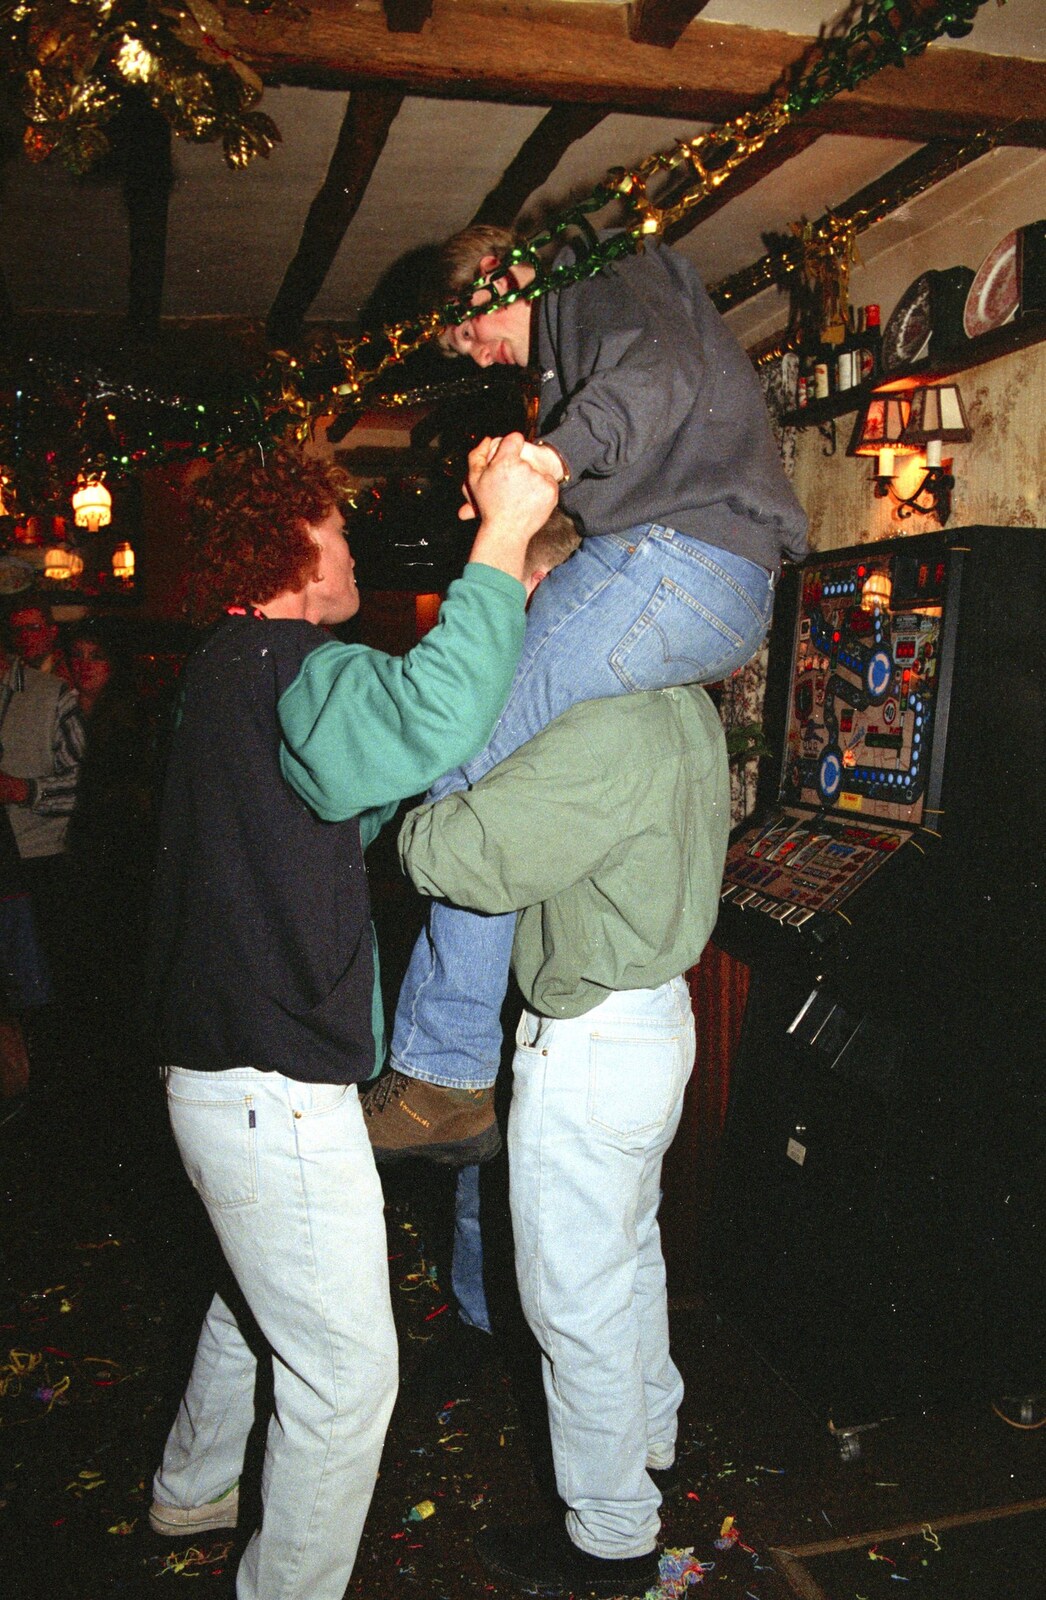 Paul gets a piggy back from New Year's Eve at the Swan Inn, Brome, Suffolk - 31st December 1994